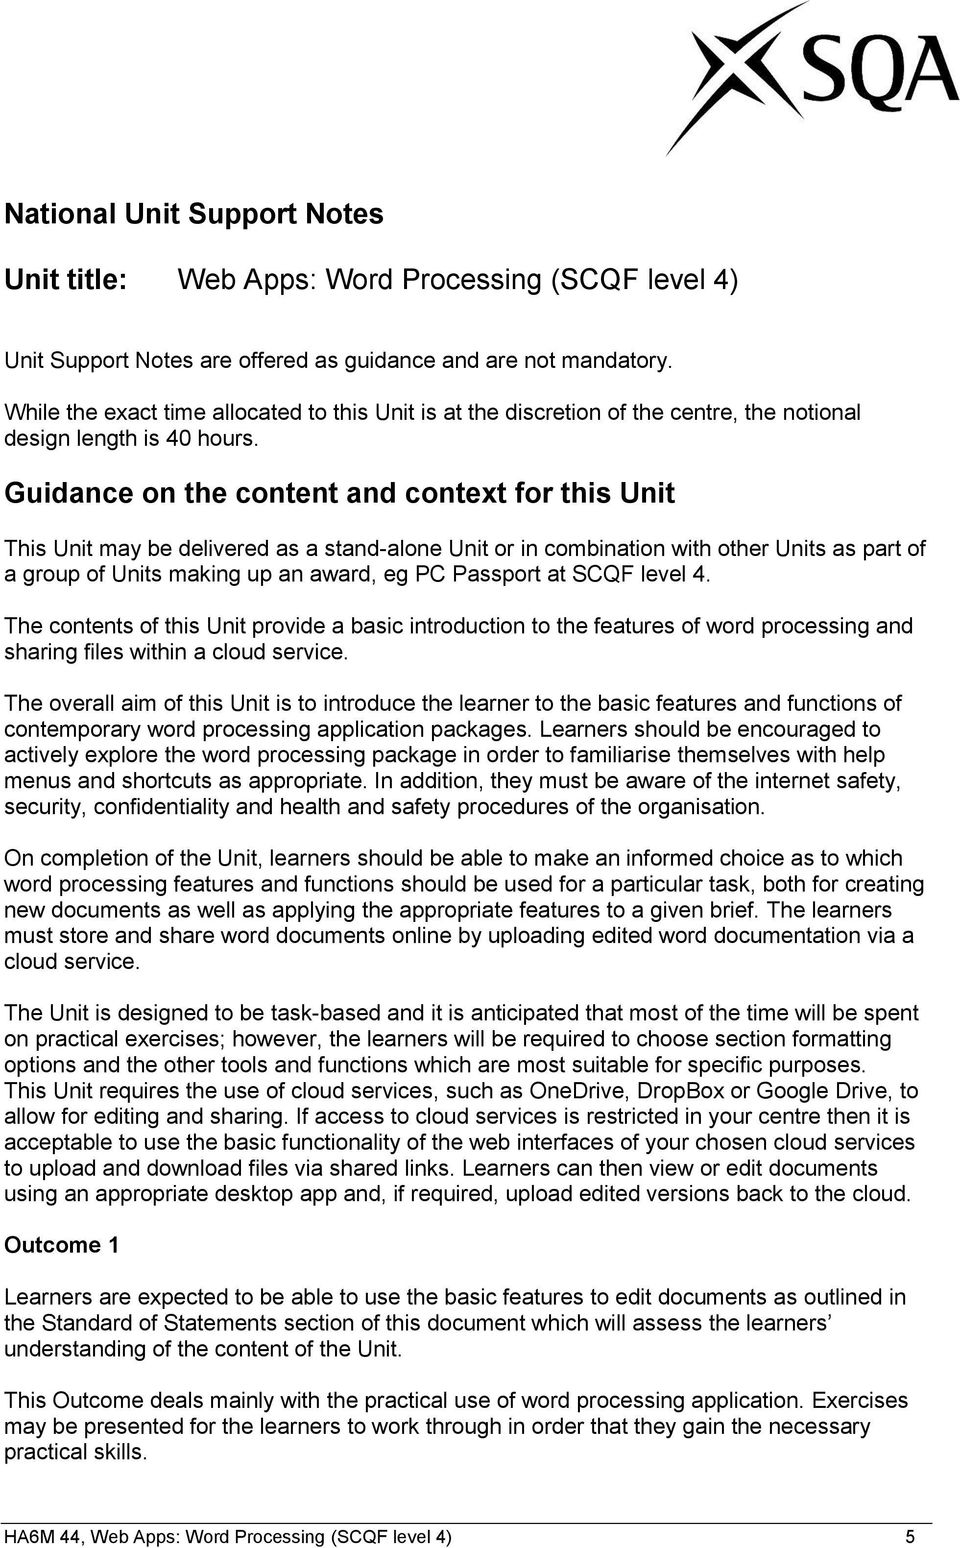 Guidance on the content and context for this Unit This Unit may be delivered as a stand-alone Unit or in combination with other Units as part of a group of Units making up an award, eg PC Passport at